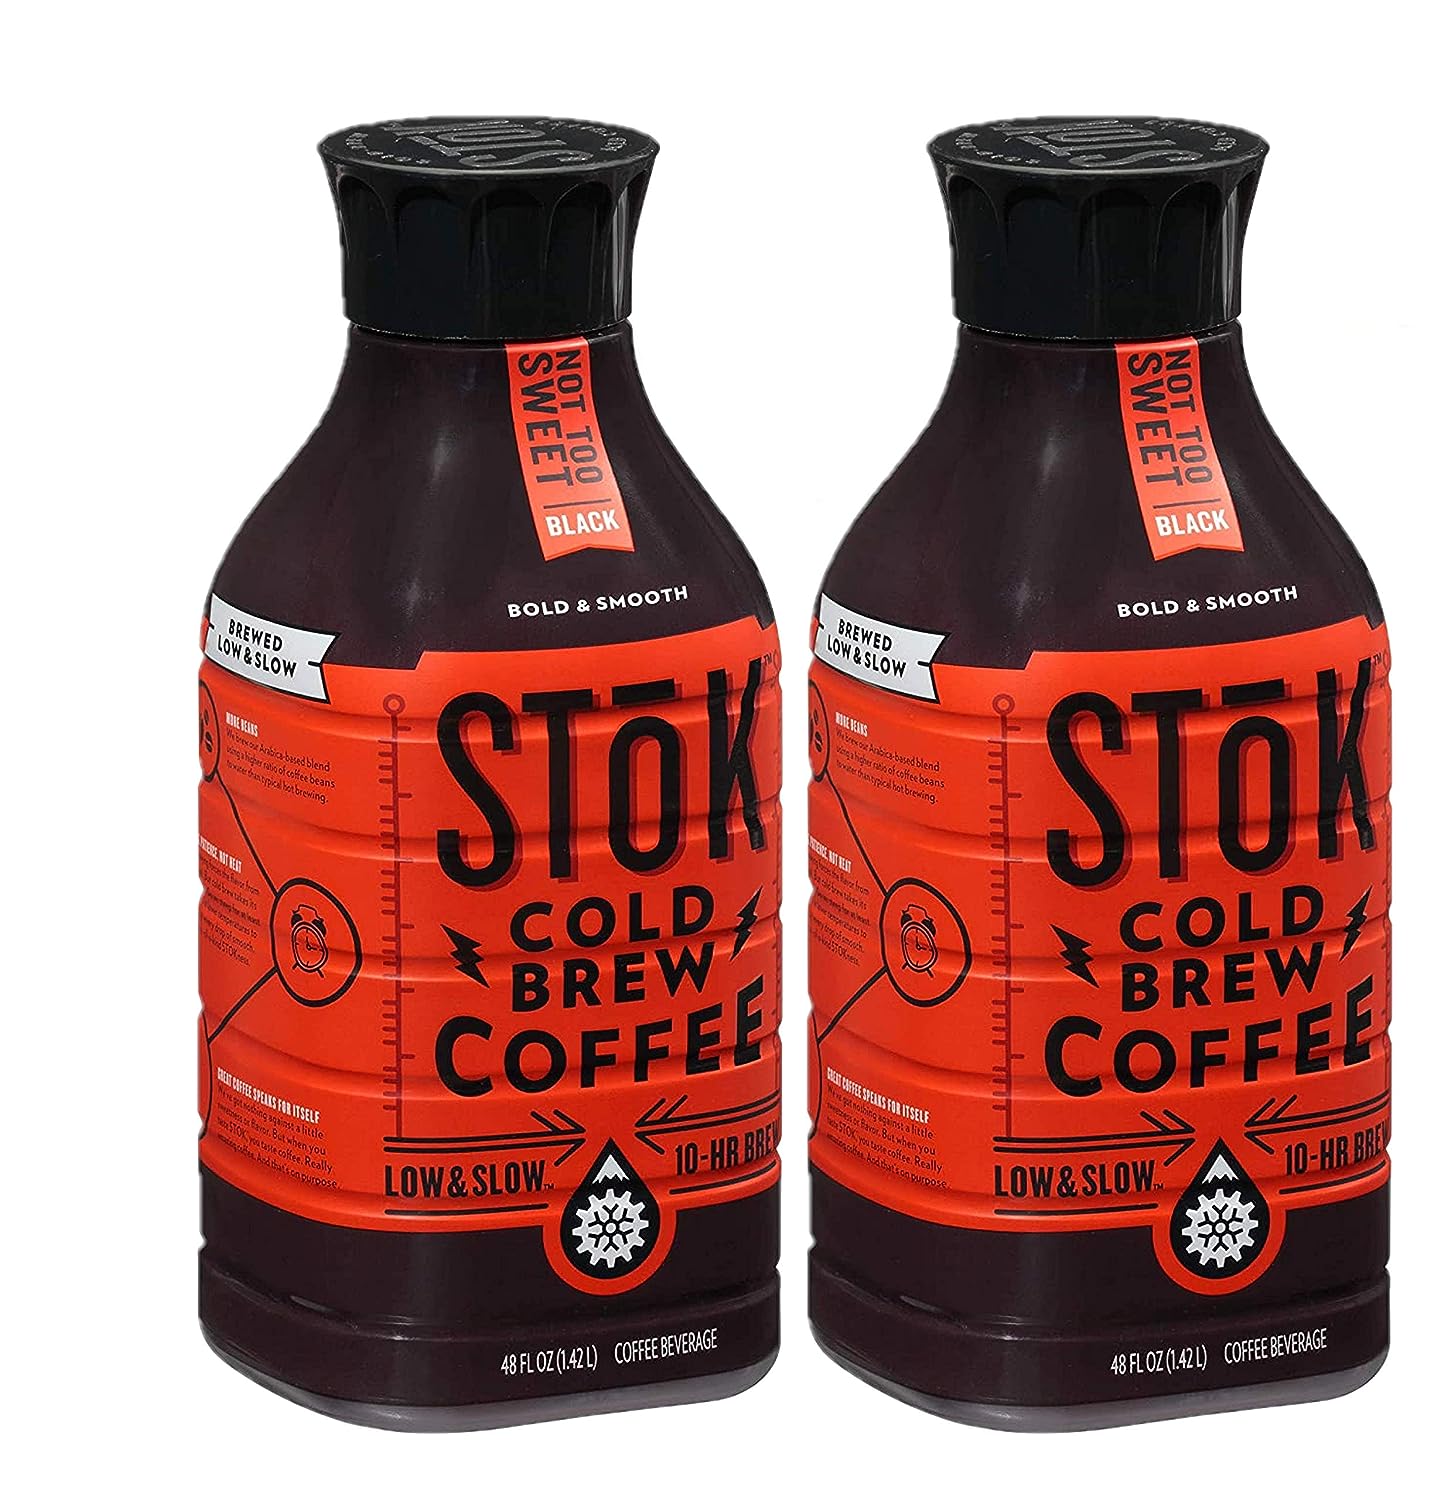 STOK Cold BRew Coffee Not Too Sweet, Pack of 2